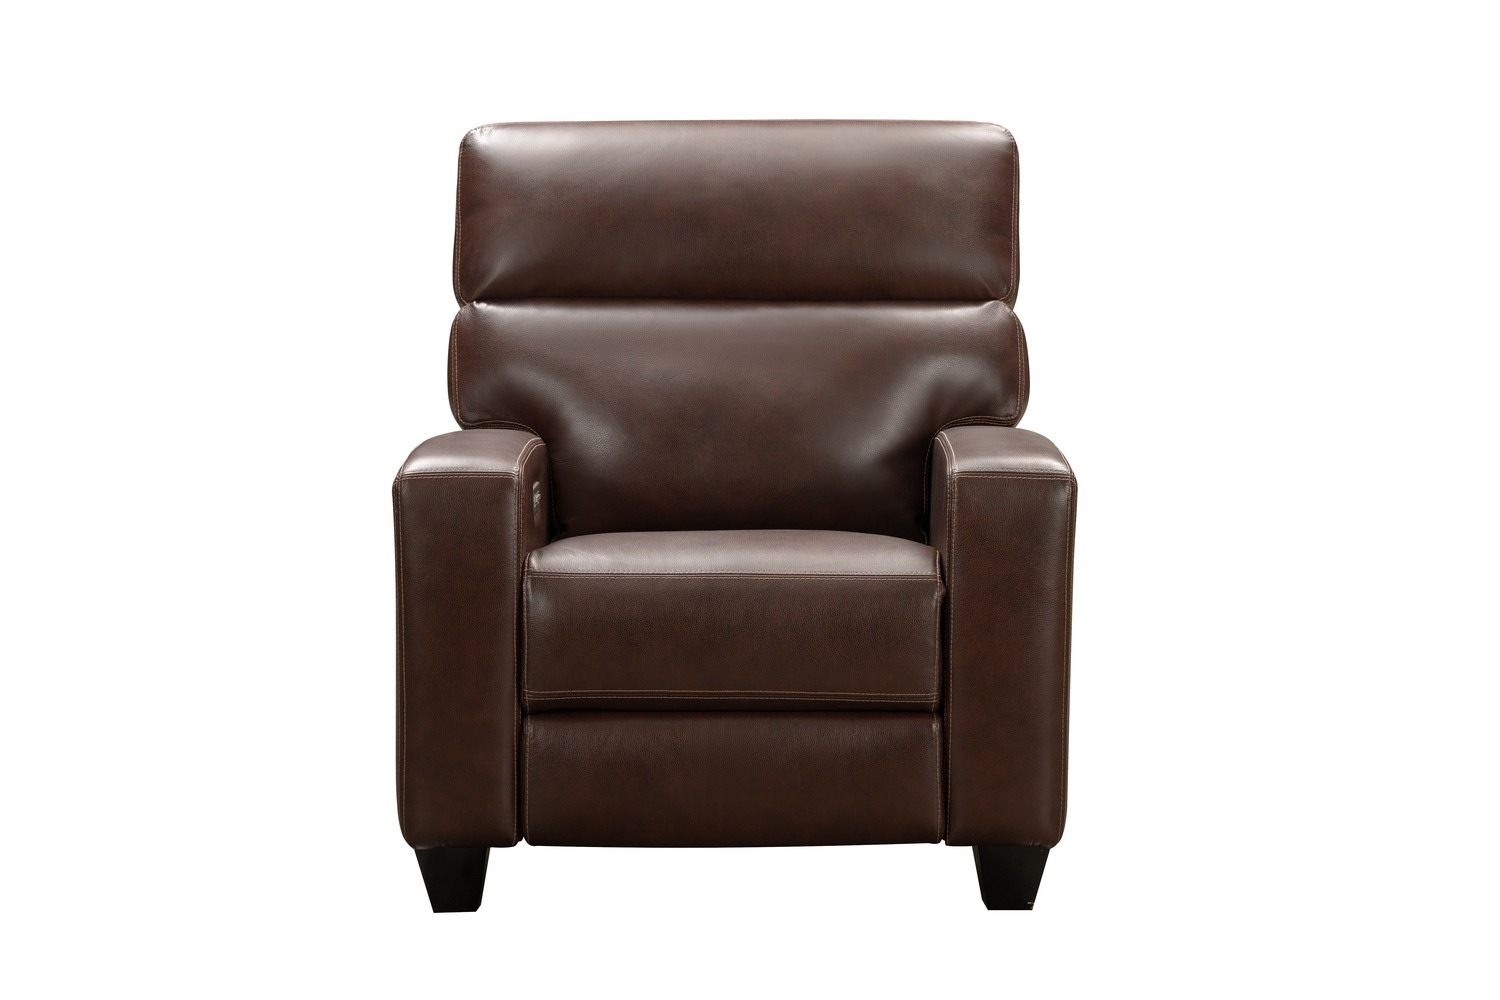 Barcalounger Marcello Power Recliner Chair with Power Head Rest and Power Lumbar - Castleton Rustic Brown/Leather Match